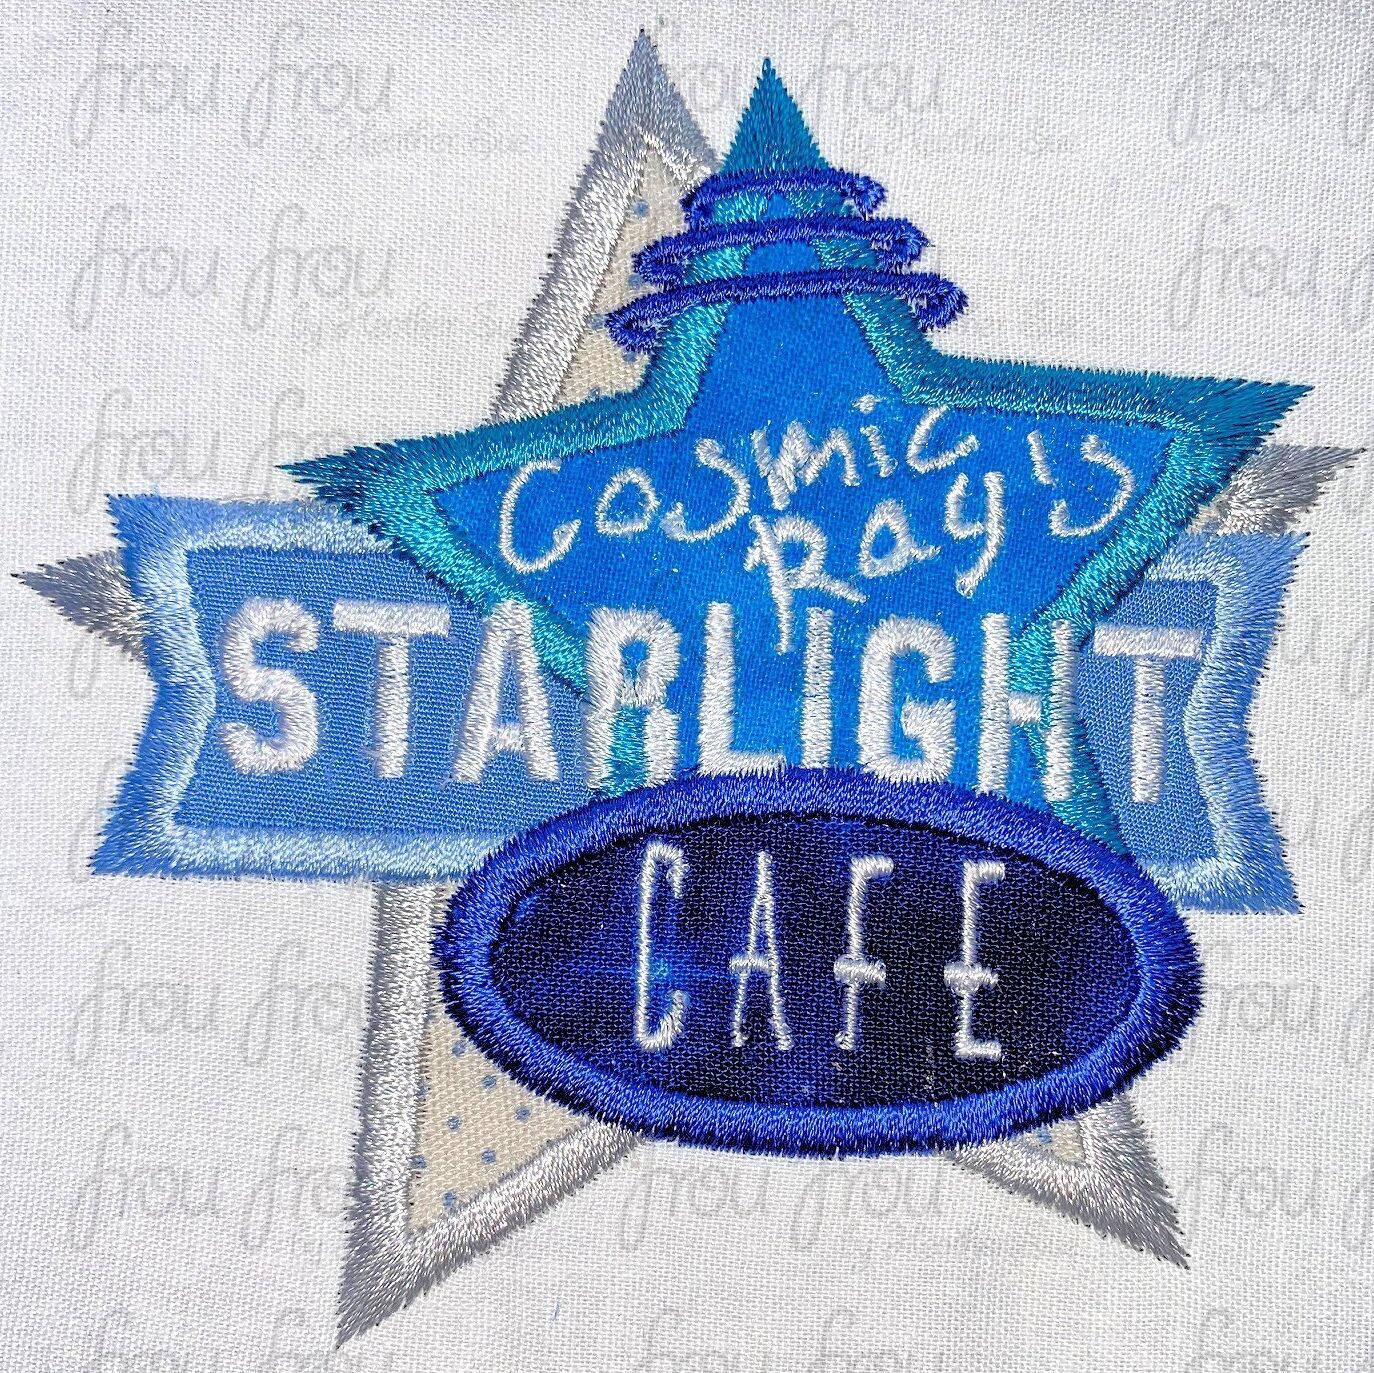 Cosmic Restaurant Starlight Cafe Logo Sign Wording Machine Applique and filled Embroidery Design, multiple sizes including 3"-16"